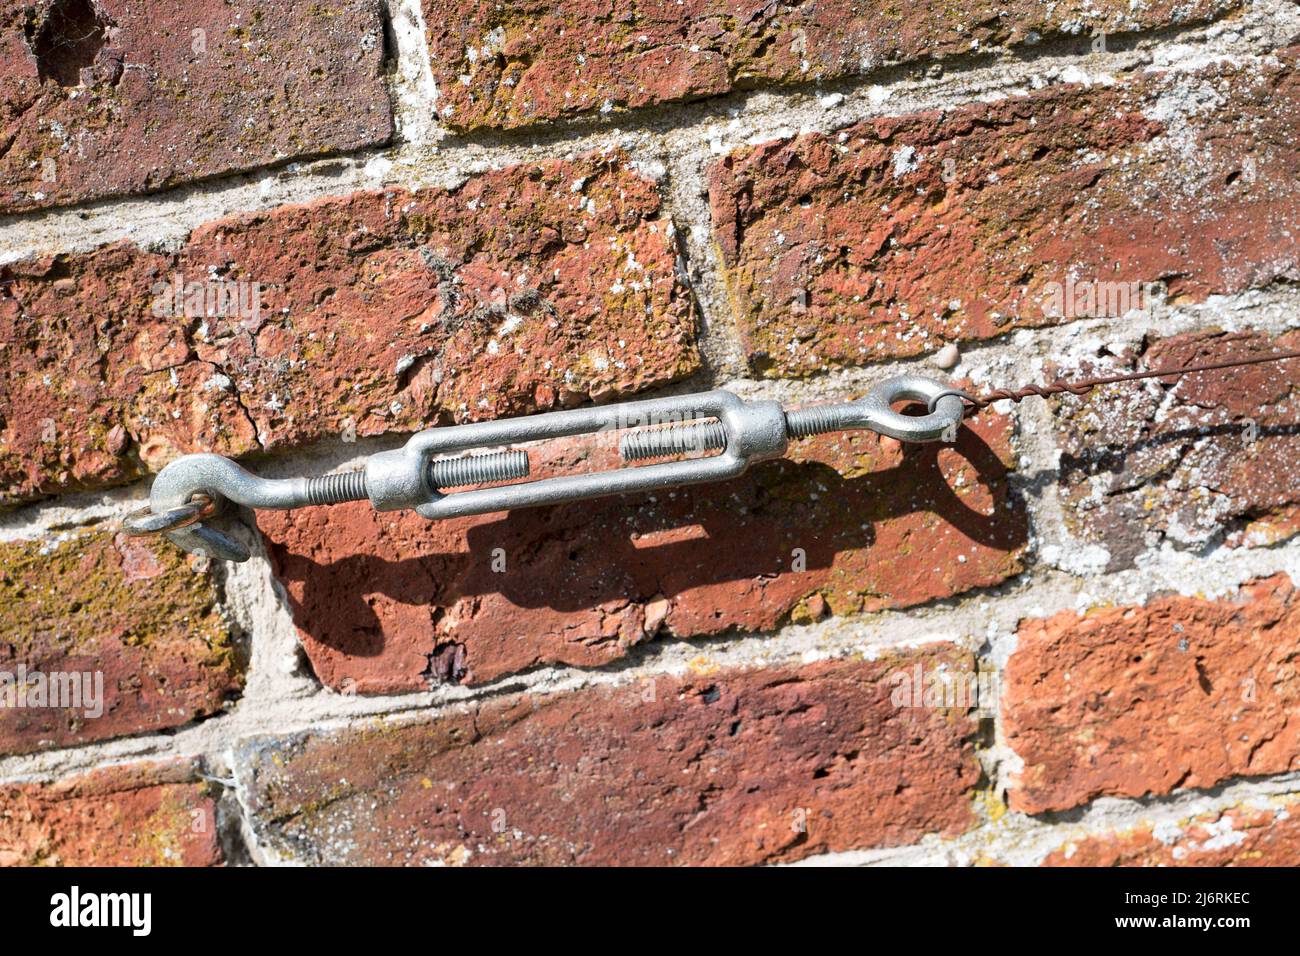 Standard galvanised steel Turnbuckle with hook and shackle attached to a brick wall with wire attached. Stock Photo